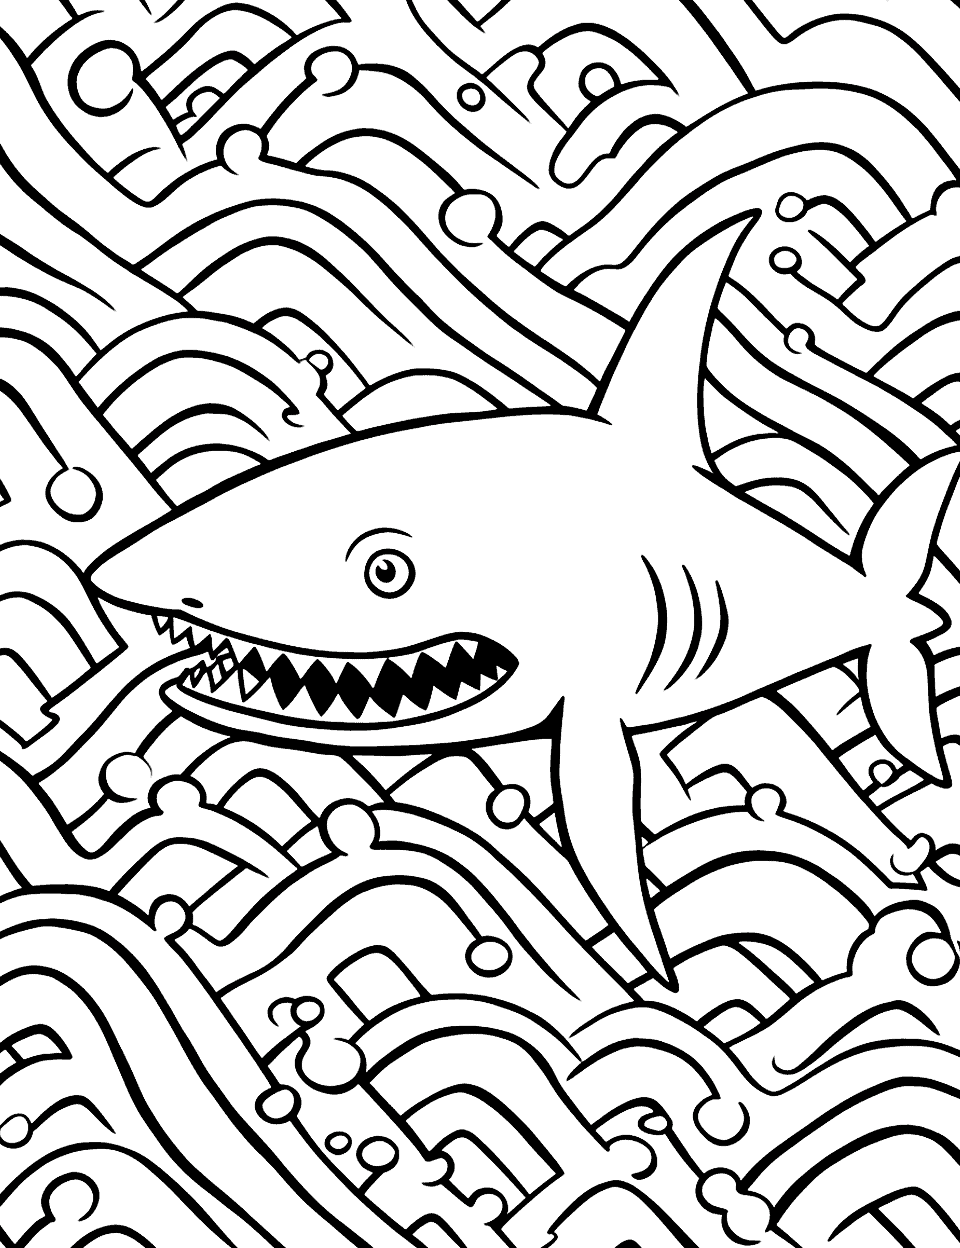 Shark Pattern Maze Coloring Page - A complex maze made out of shark patterns.